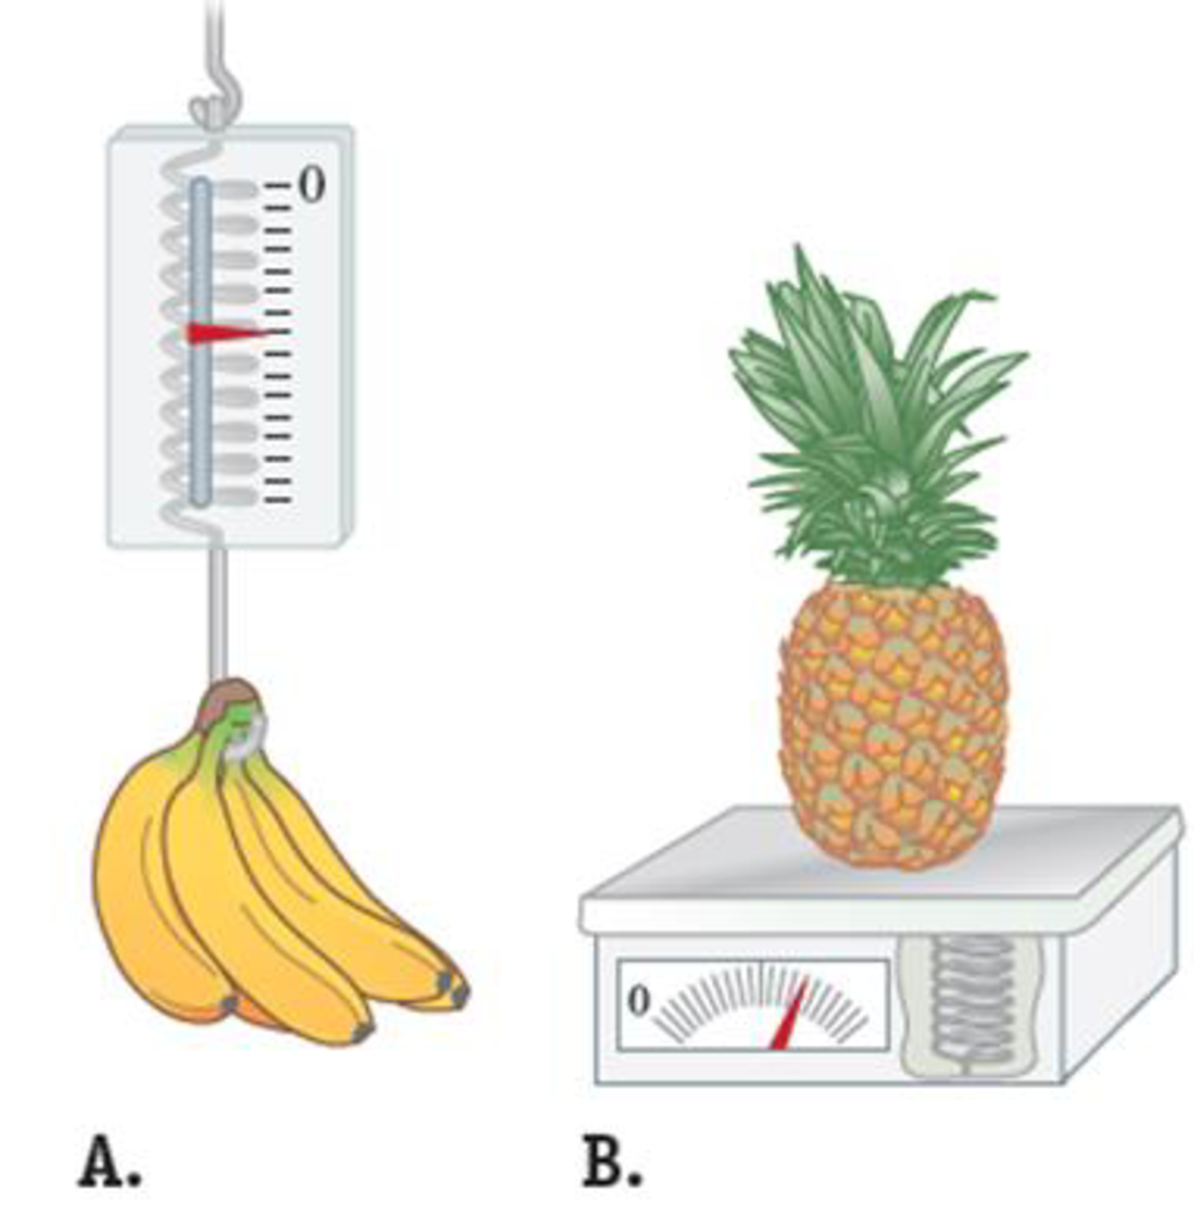 Chapter 5.7, Problem 5.8CE, Imagine weighing the same bunch of bananas with two different spring scales like the one in Figure 